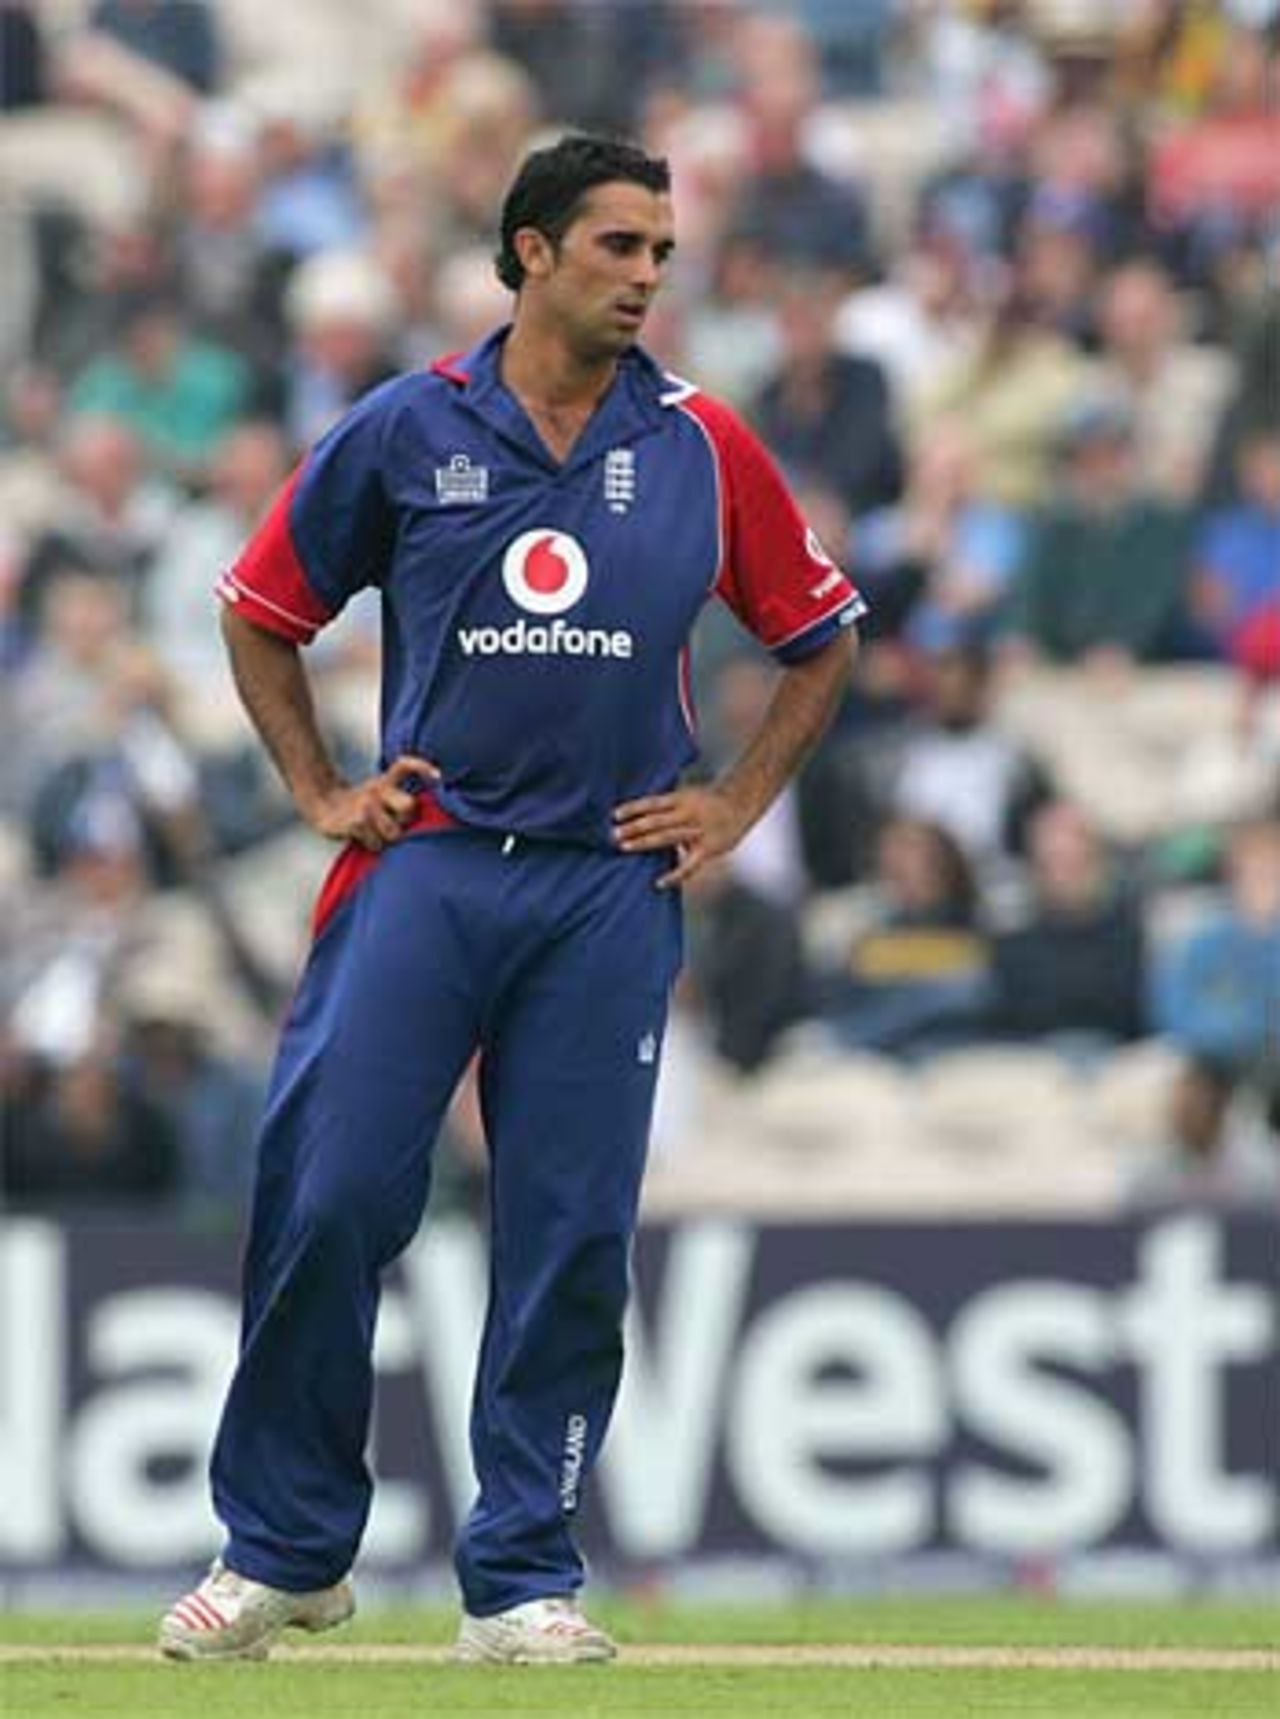 Kabir Ali's expression says it all - he went for 77 runs and took no wickets, England v Sri Lanka, 4th ODI, Old Trafford, June 28, 2006